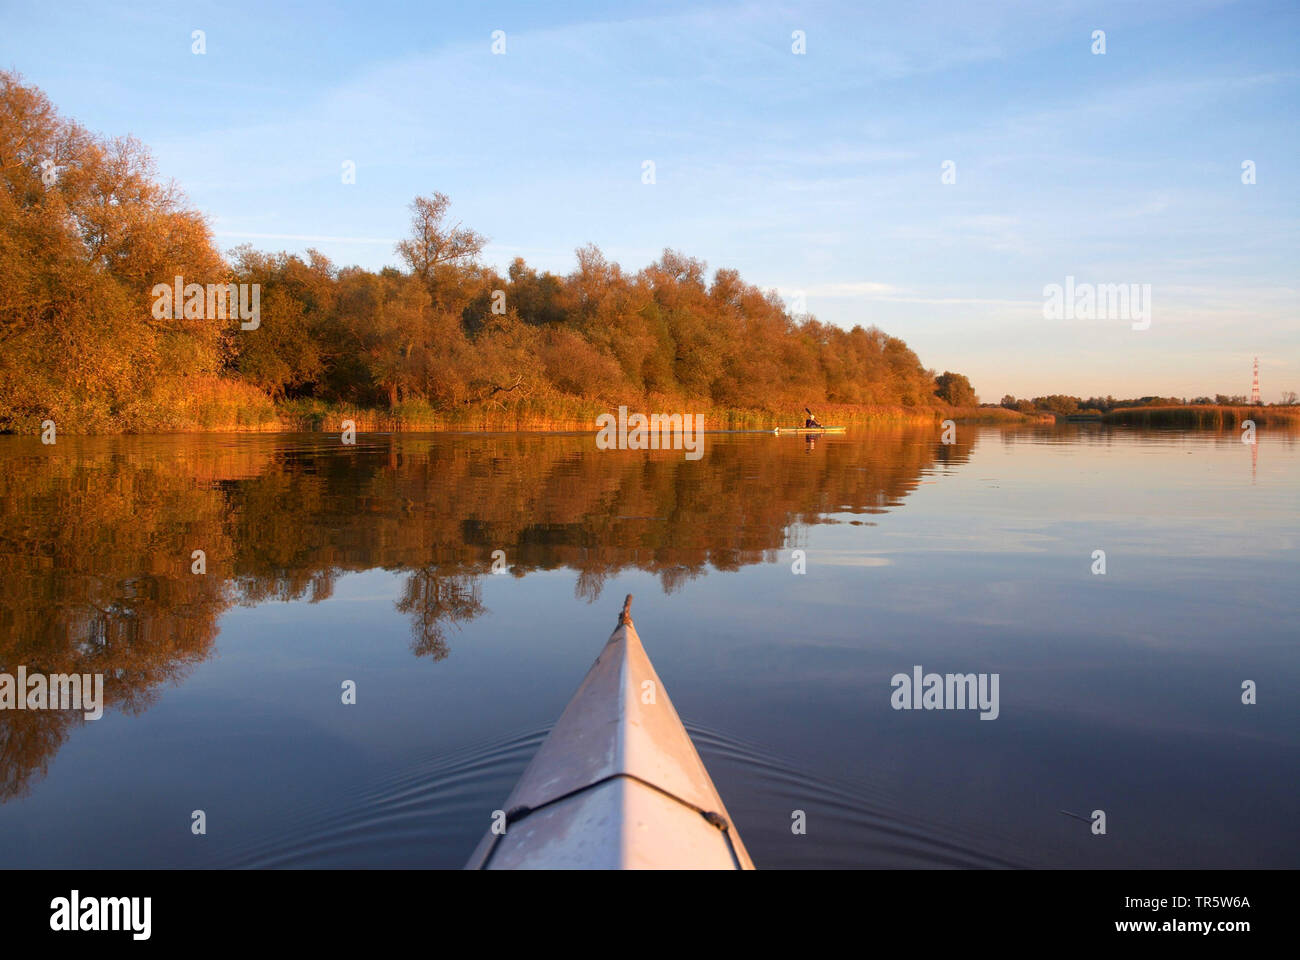 kayaking on Elbe river near Pagensand isle, Germany, Schleswig-Holstein, Elbe Stock Photo